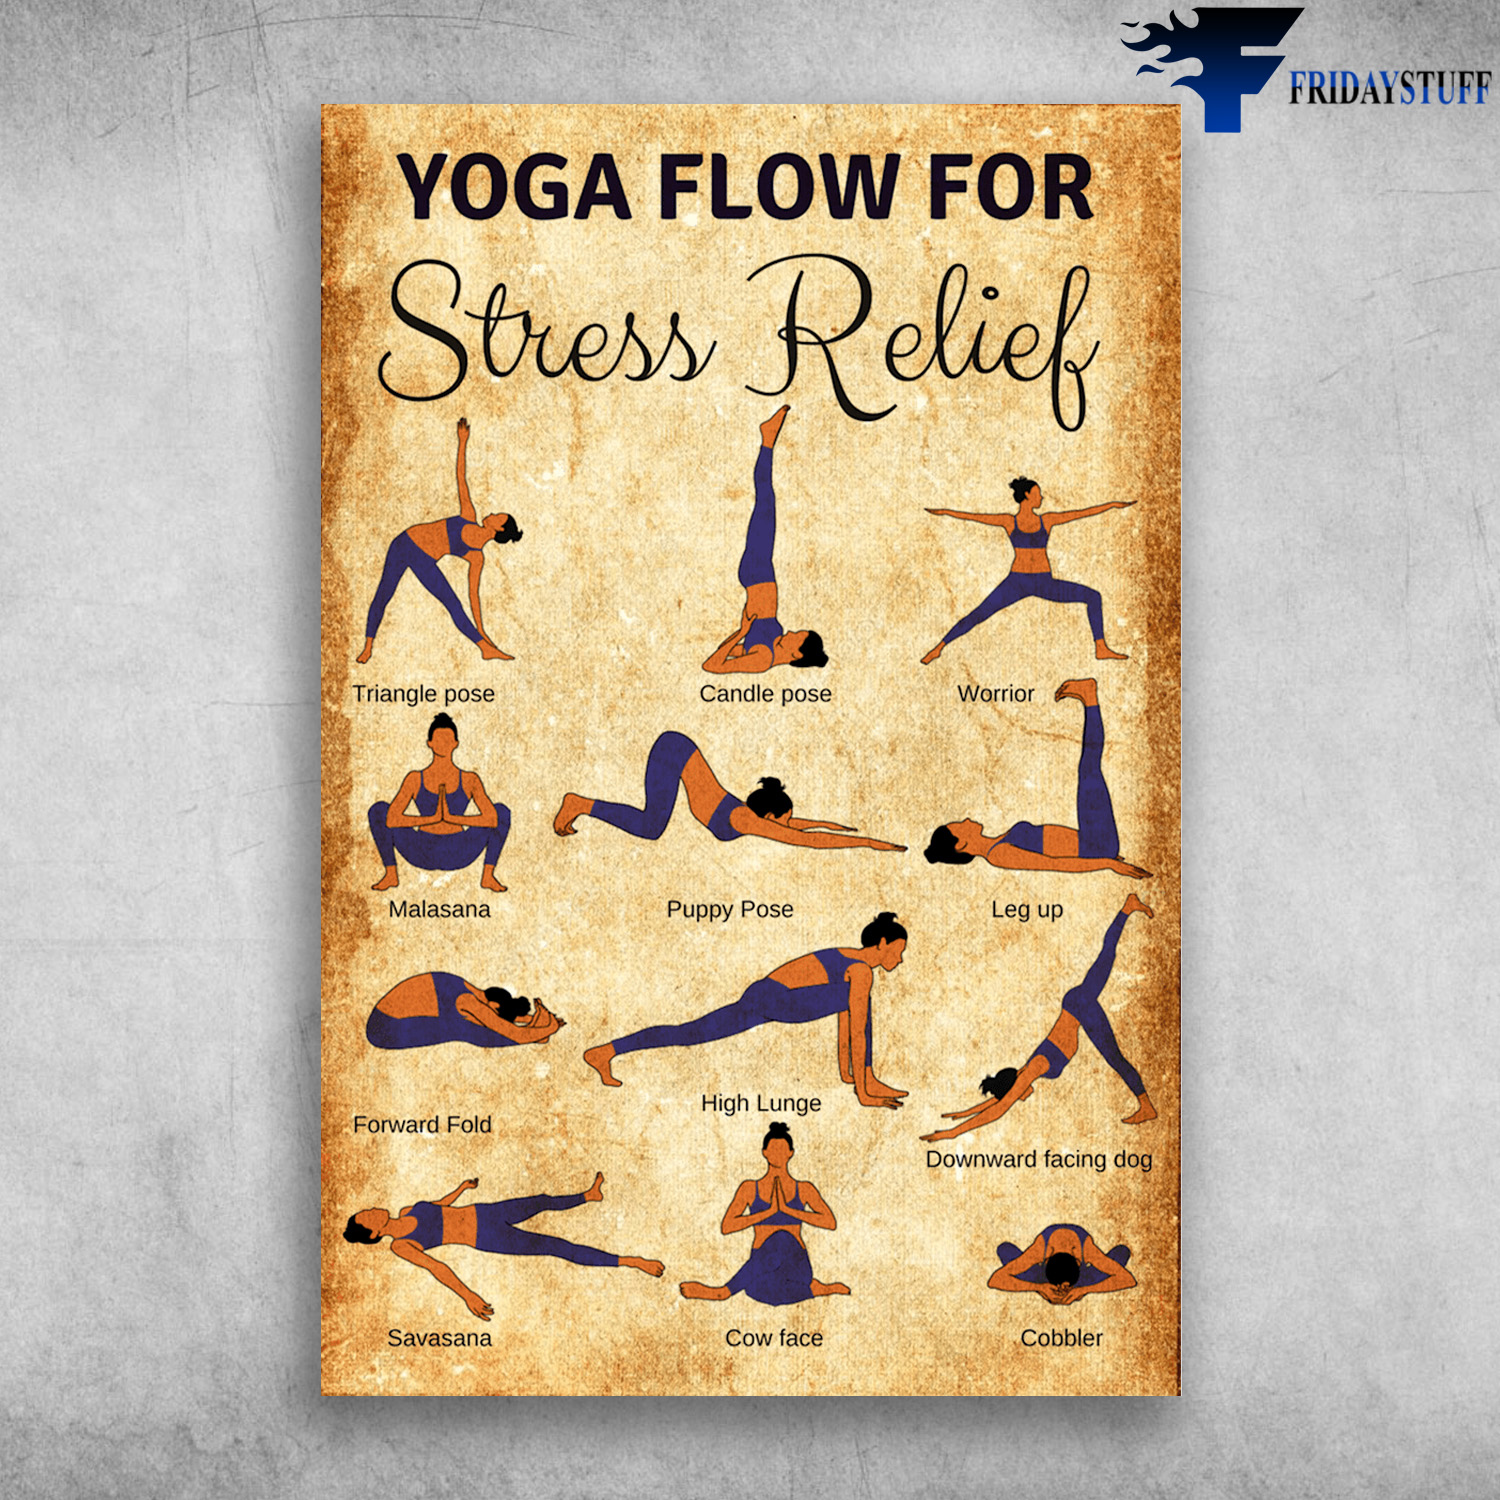 Yoga poses for stress relief Lifestyle - Times of India Videos, Stress  Relief - valleyresorts.co.uk